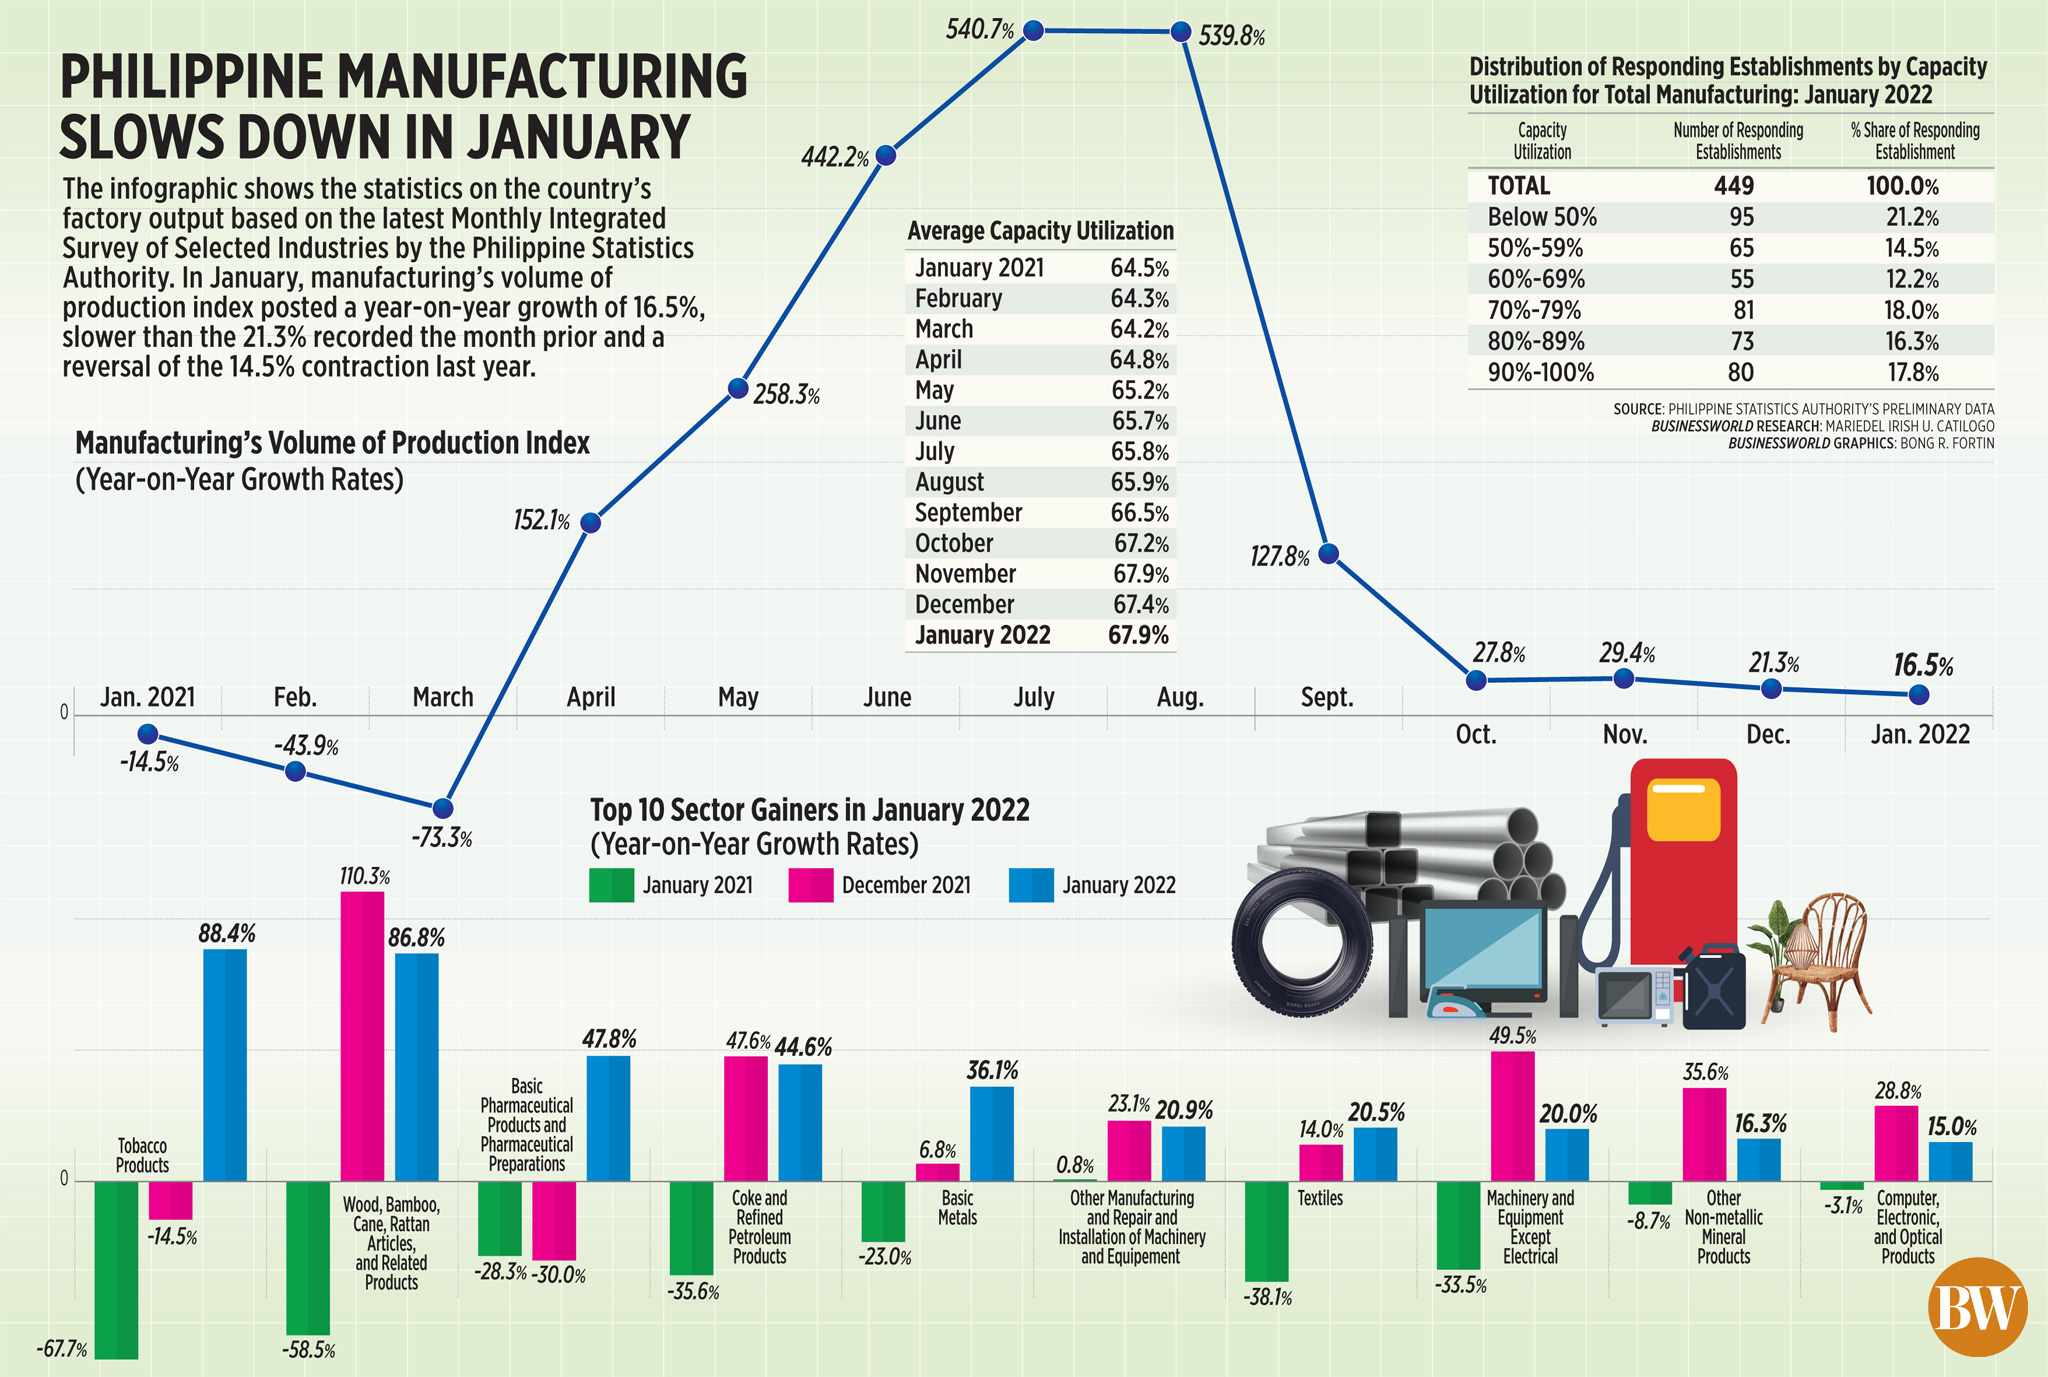 Philippine manufacturing slows down in January (2022)